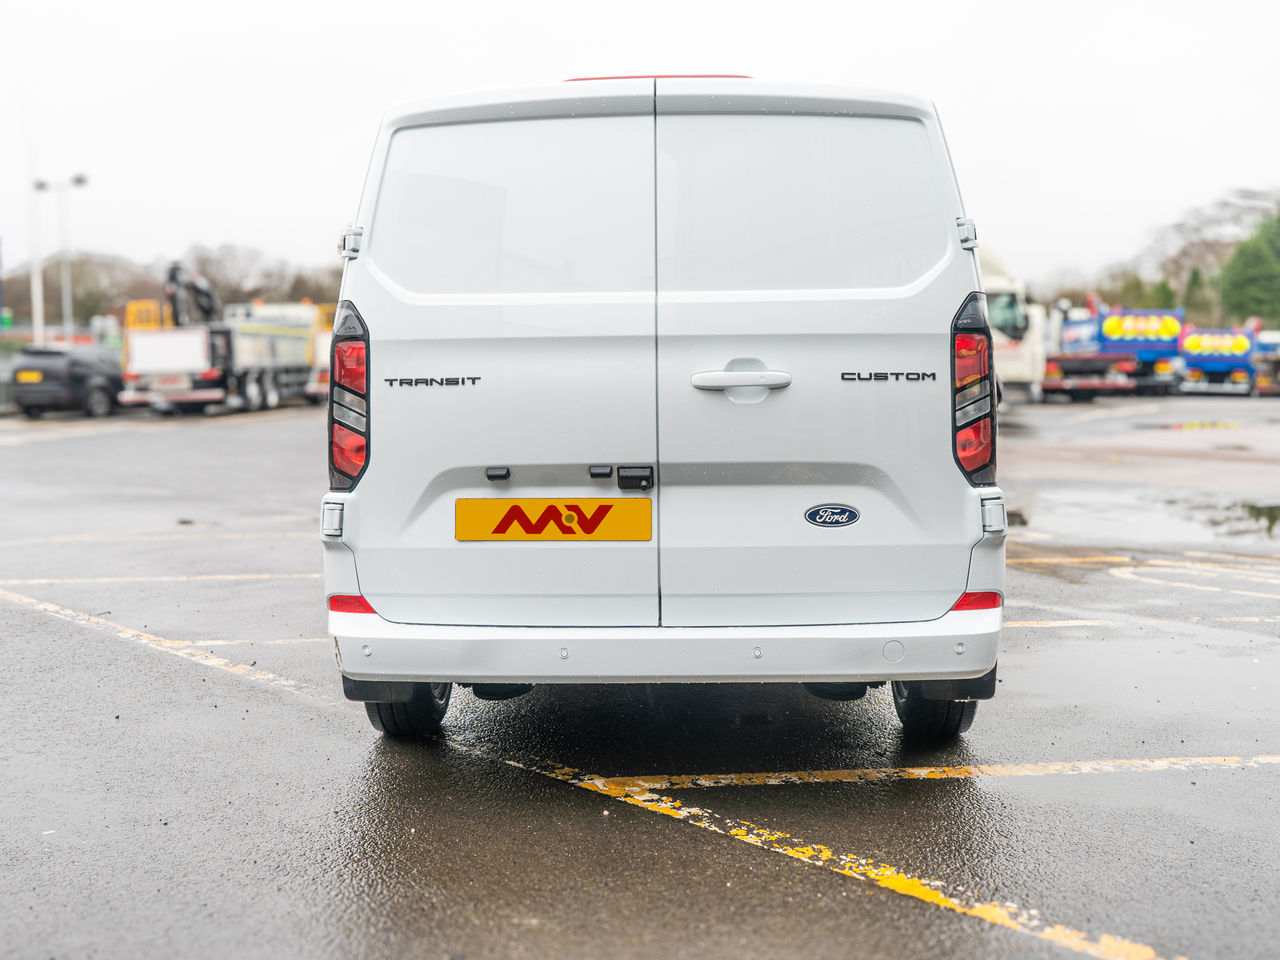 Ready to go Ford Transit, Van, 134, Under 3.5 Tonne, Single Cab, 6-Speed Manual Gearbox, Leather Package, Trailer tow medium duty , Air Conditioning, Alloy Wheels, Colour Coded Bumper, , -, - | for sale at MV Commercial, the UKs leading Truck, Trailers and Van supplier. (YT24AXM 118598)